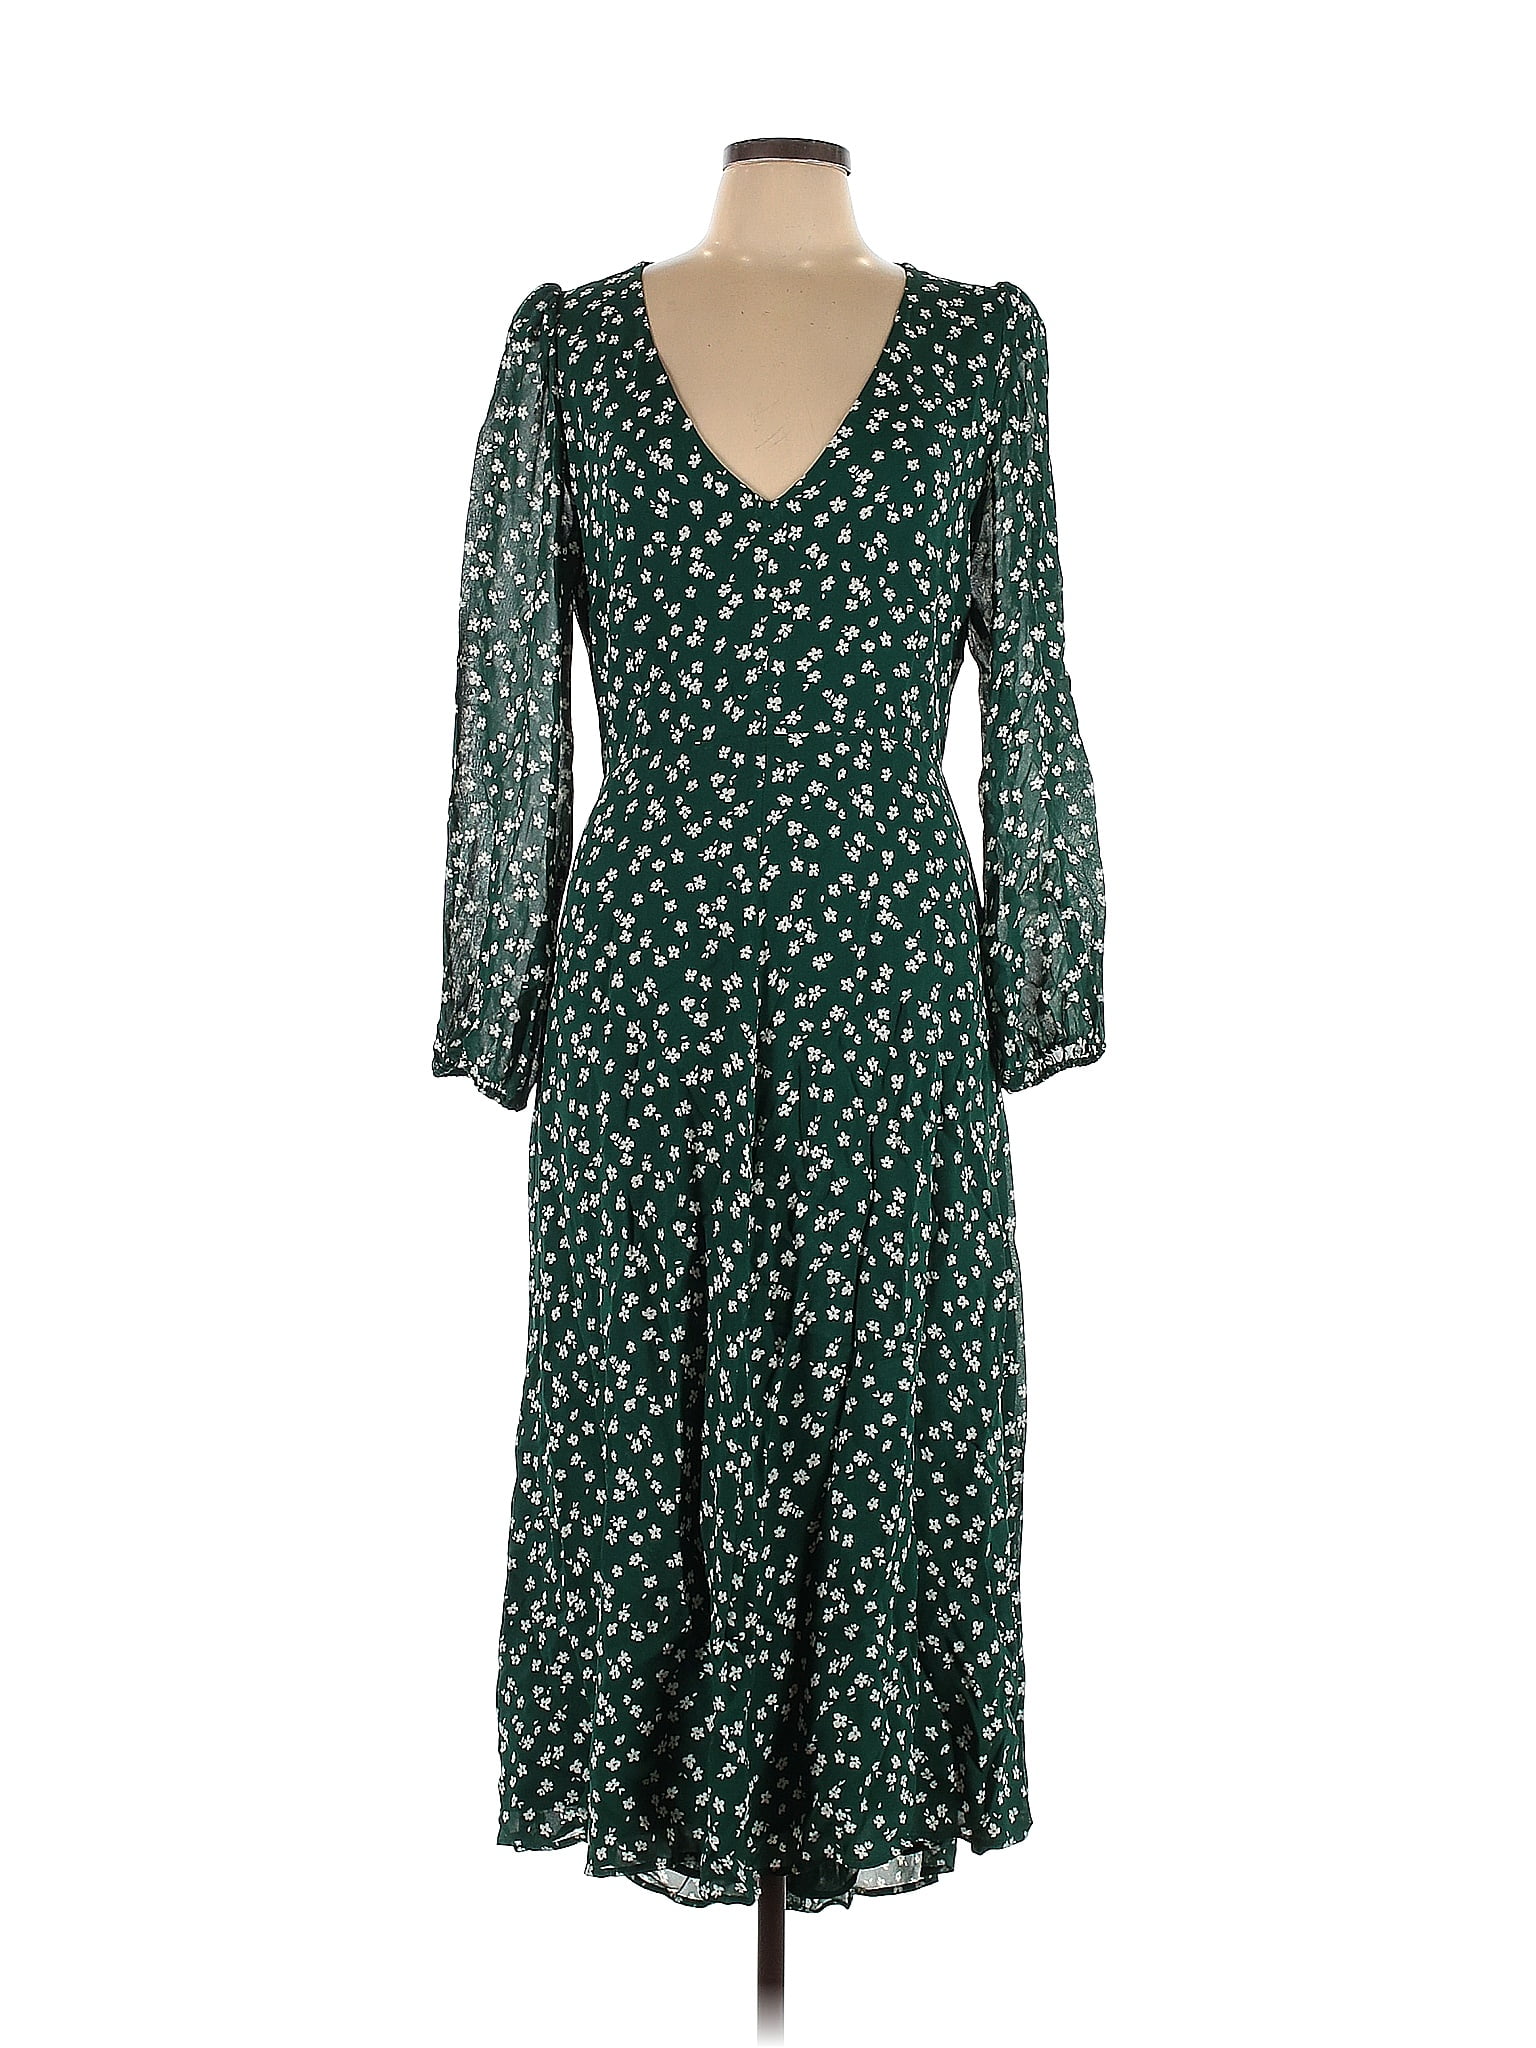 Reformation 100% Viscose Floral Green Casual Dress Size 12 - 58% off ...